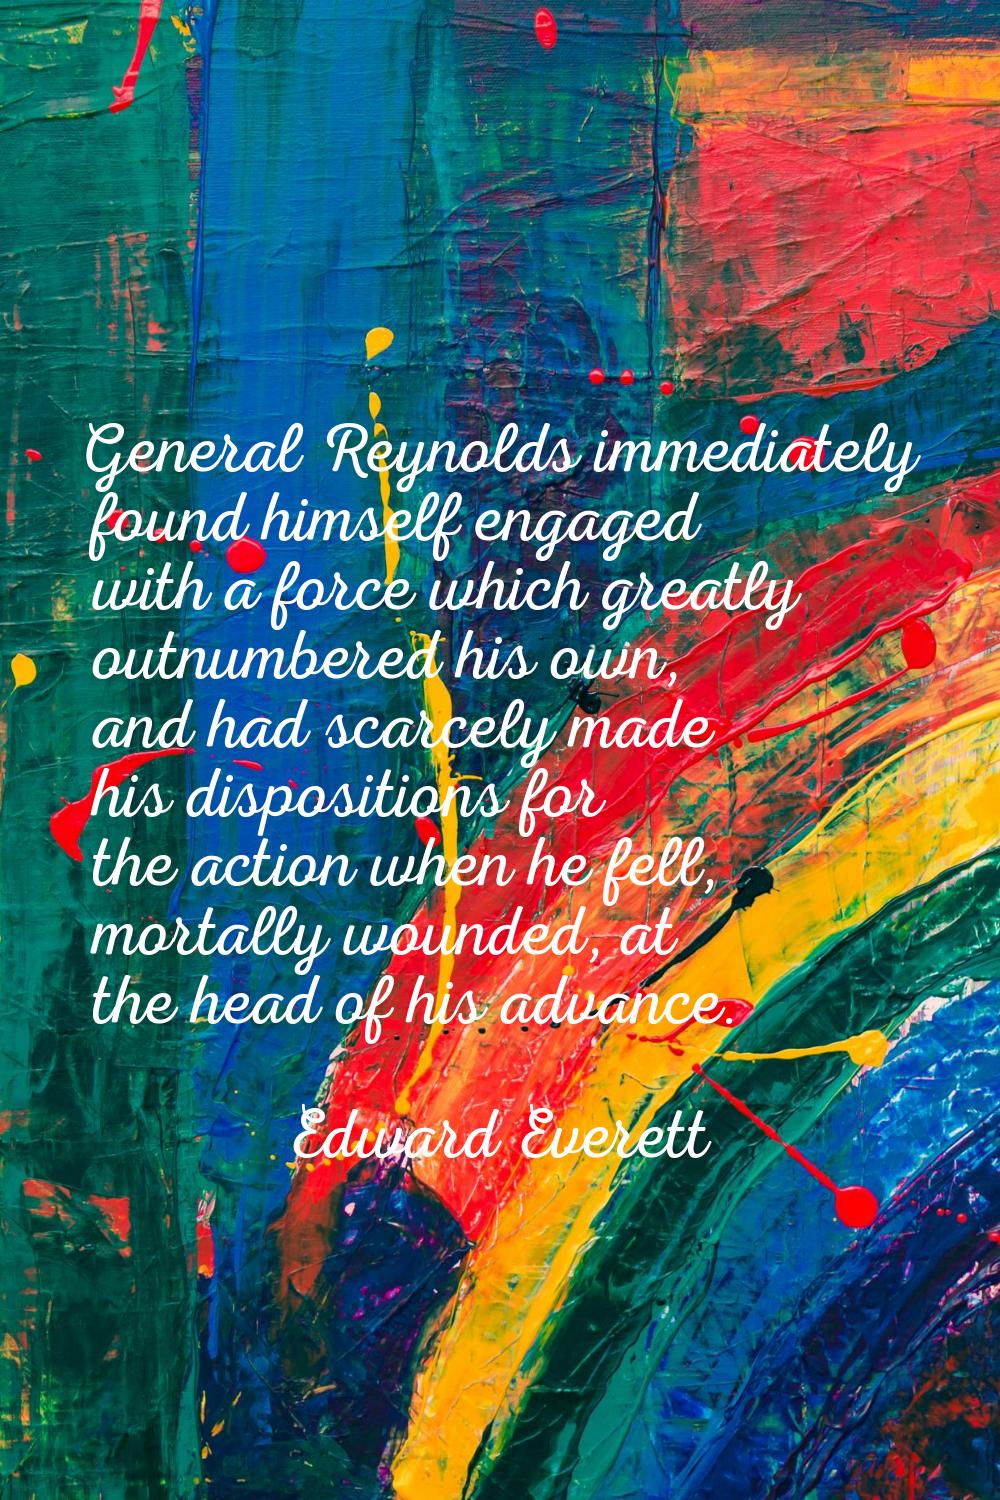 General Reynolds immediately found himself engaged with a force which greatly outnumbered his own, 